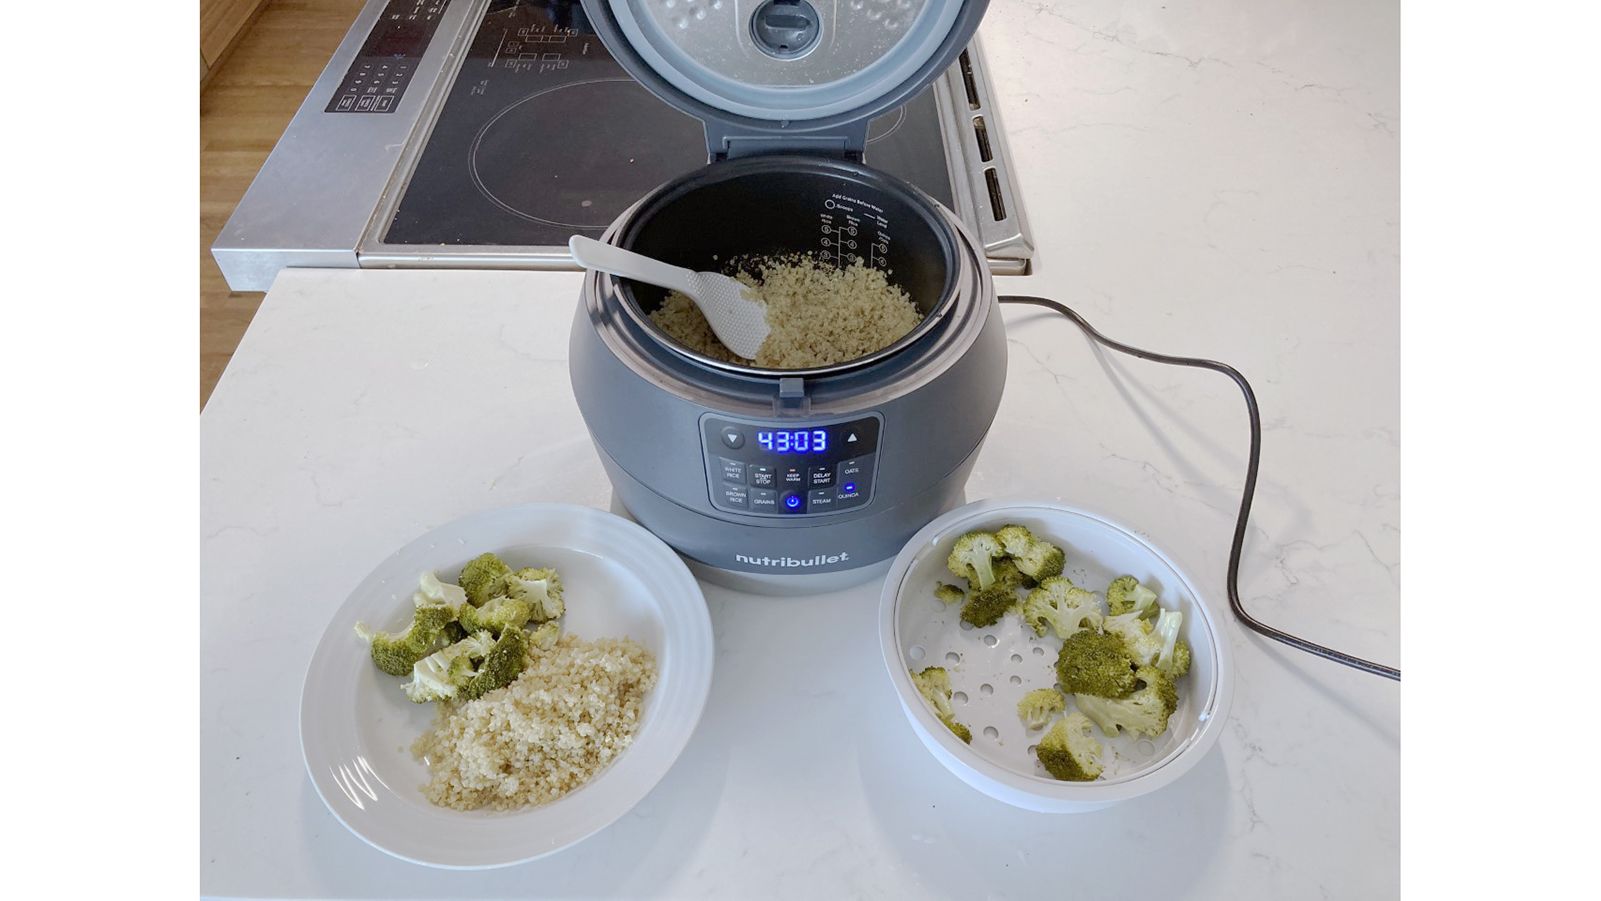 Did you know the NutriBullet EveryGrain Cooker can cook your rice and steam  your veggies, fish or even dumplings at the same time!